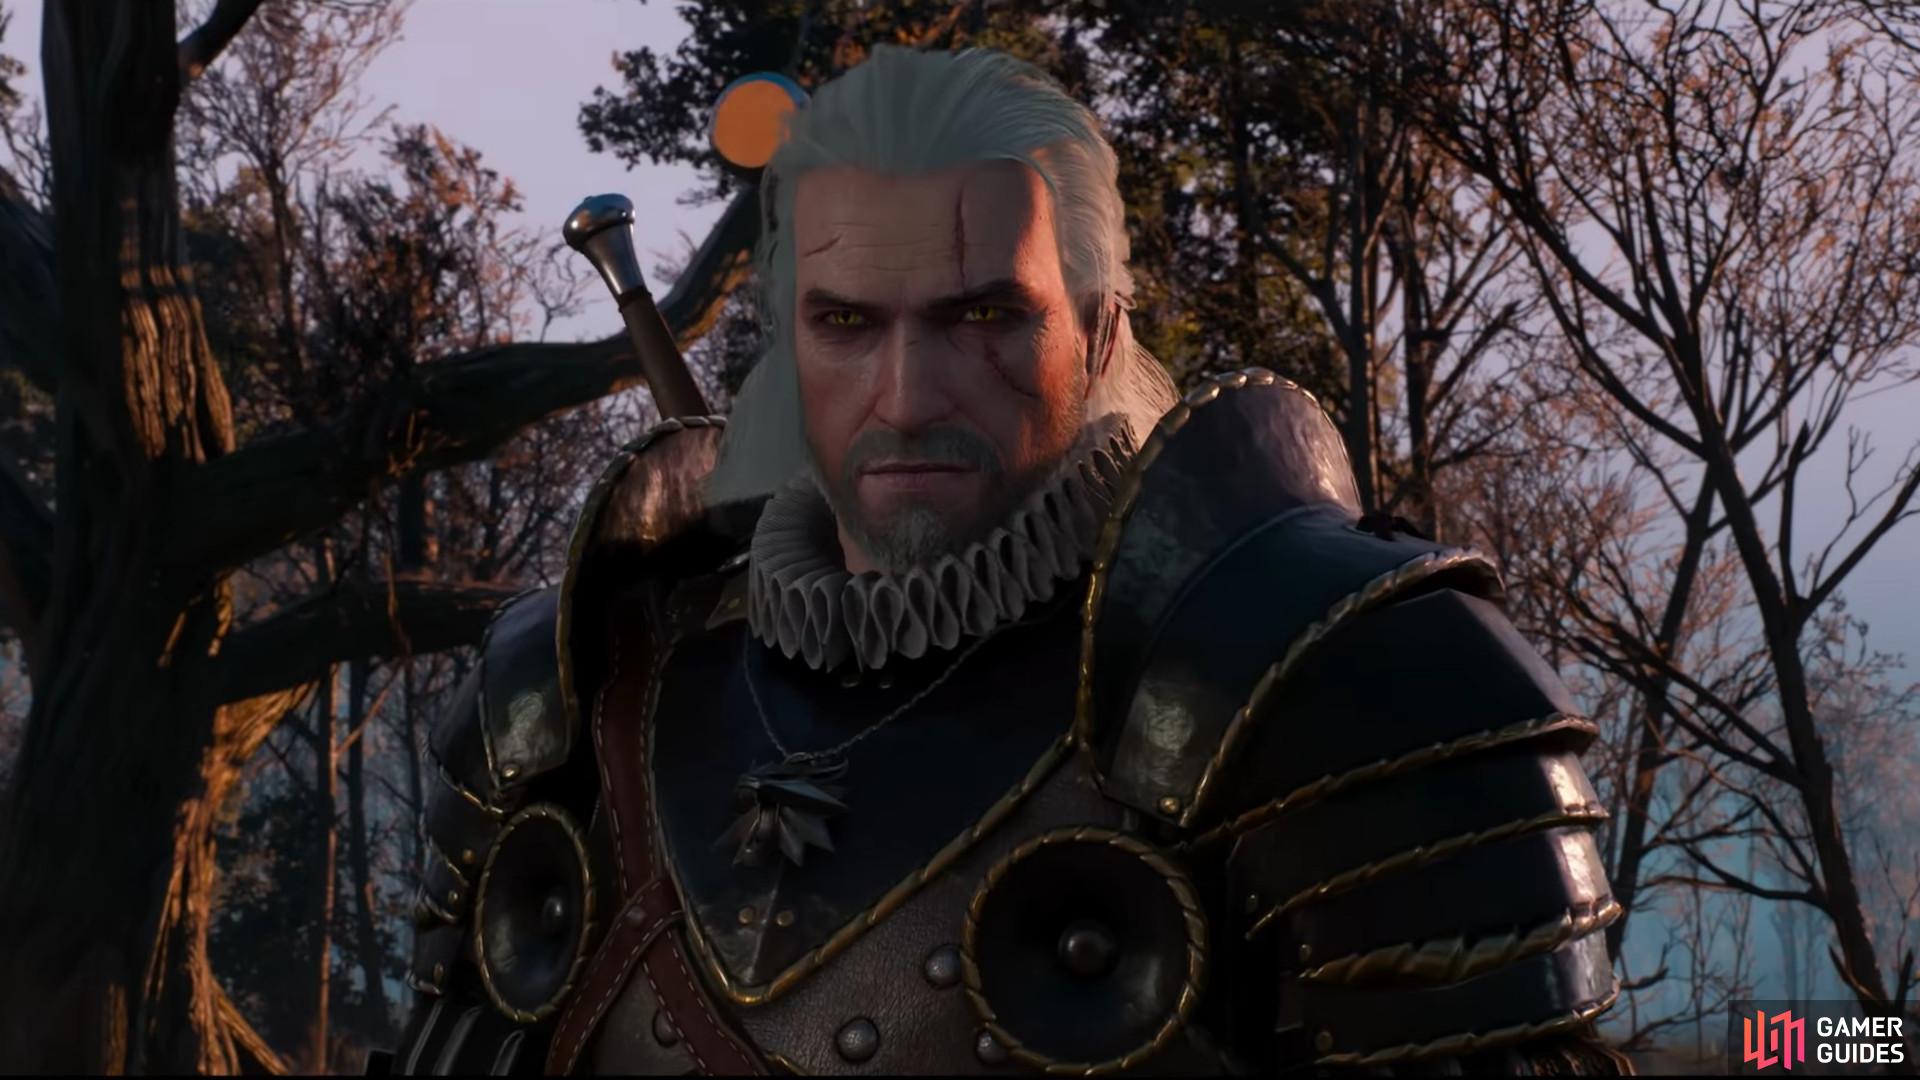 Just finished King's Gambit a few hours ago, was exploring Skellige and  found this : r/witcher